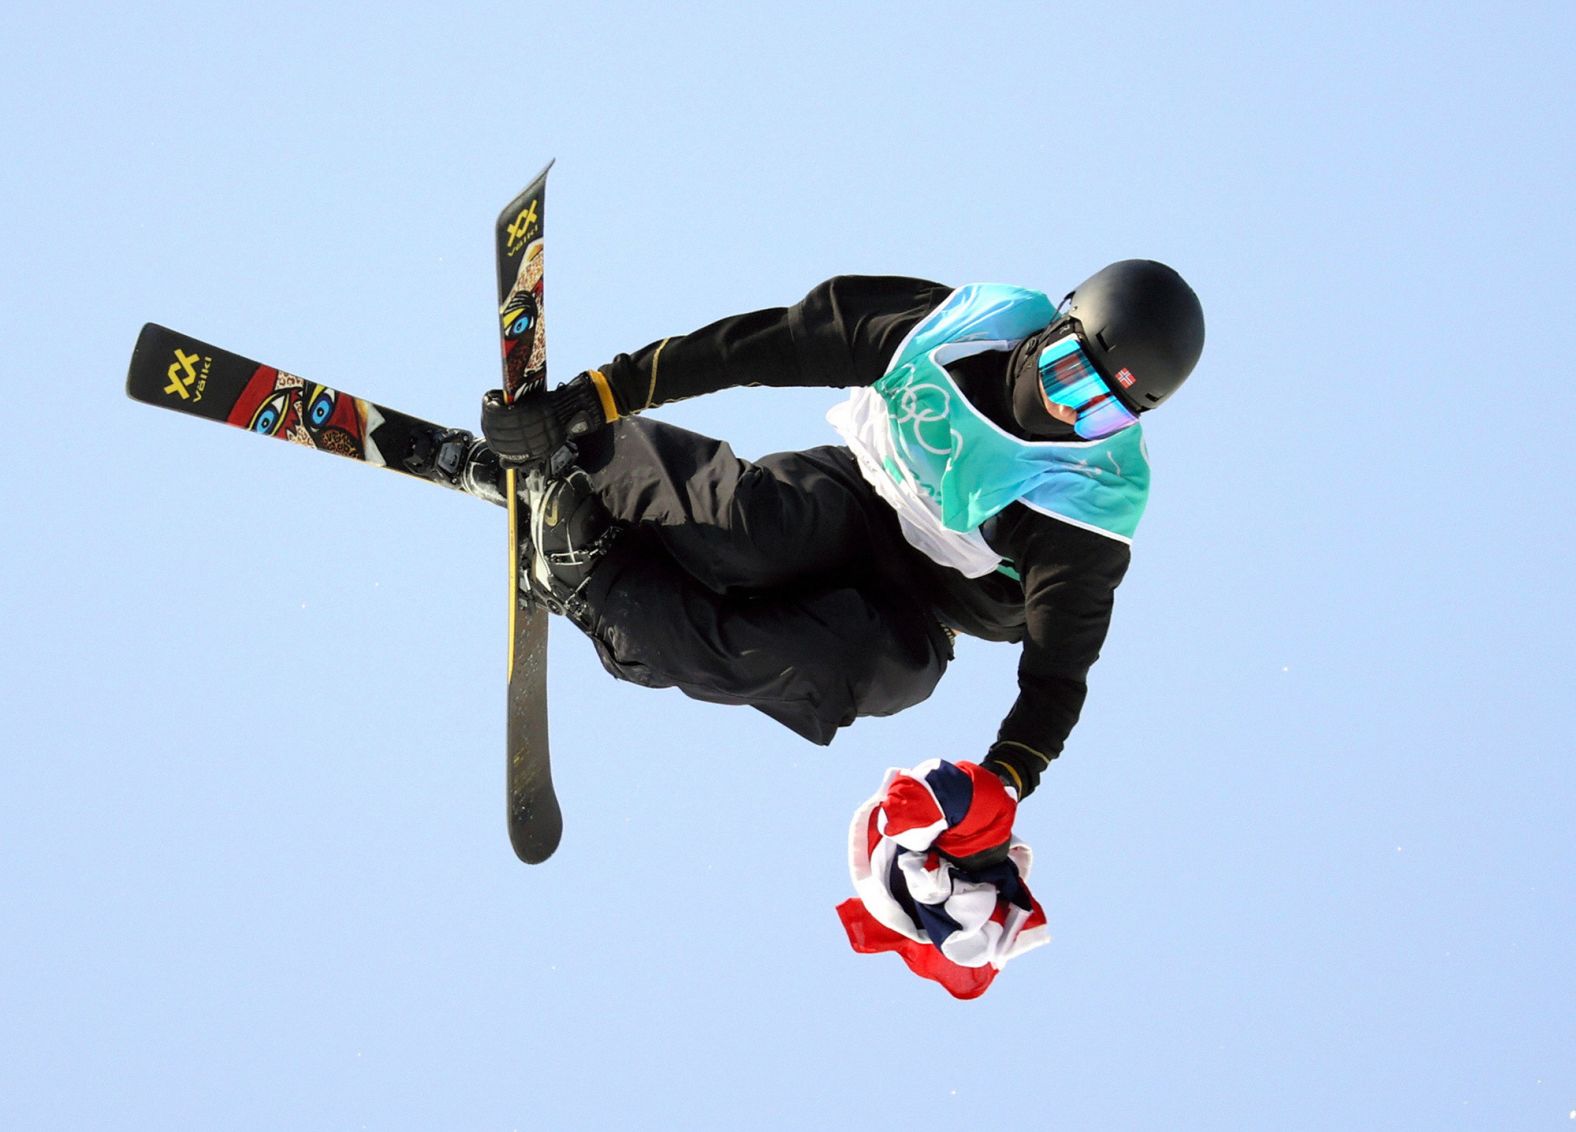 Knowing he had already clinched the gold in the big air competition, Norwegian freestyle skier Birk Ruud <a href="index.php?page=&url=https%3A%2F%2Fwww.cnn.com%2Fworld%2Flive-news%2Fbeijing-winter-olympics-02-09-22-spt%2Fh_e97aa9702edae900474c450be6ad01ed" target="_blank">holds his country's flag in his hand</a> as he completes his final jump on February 9.